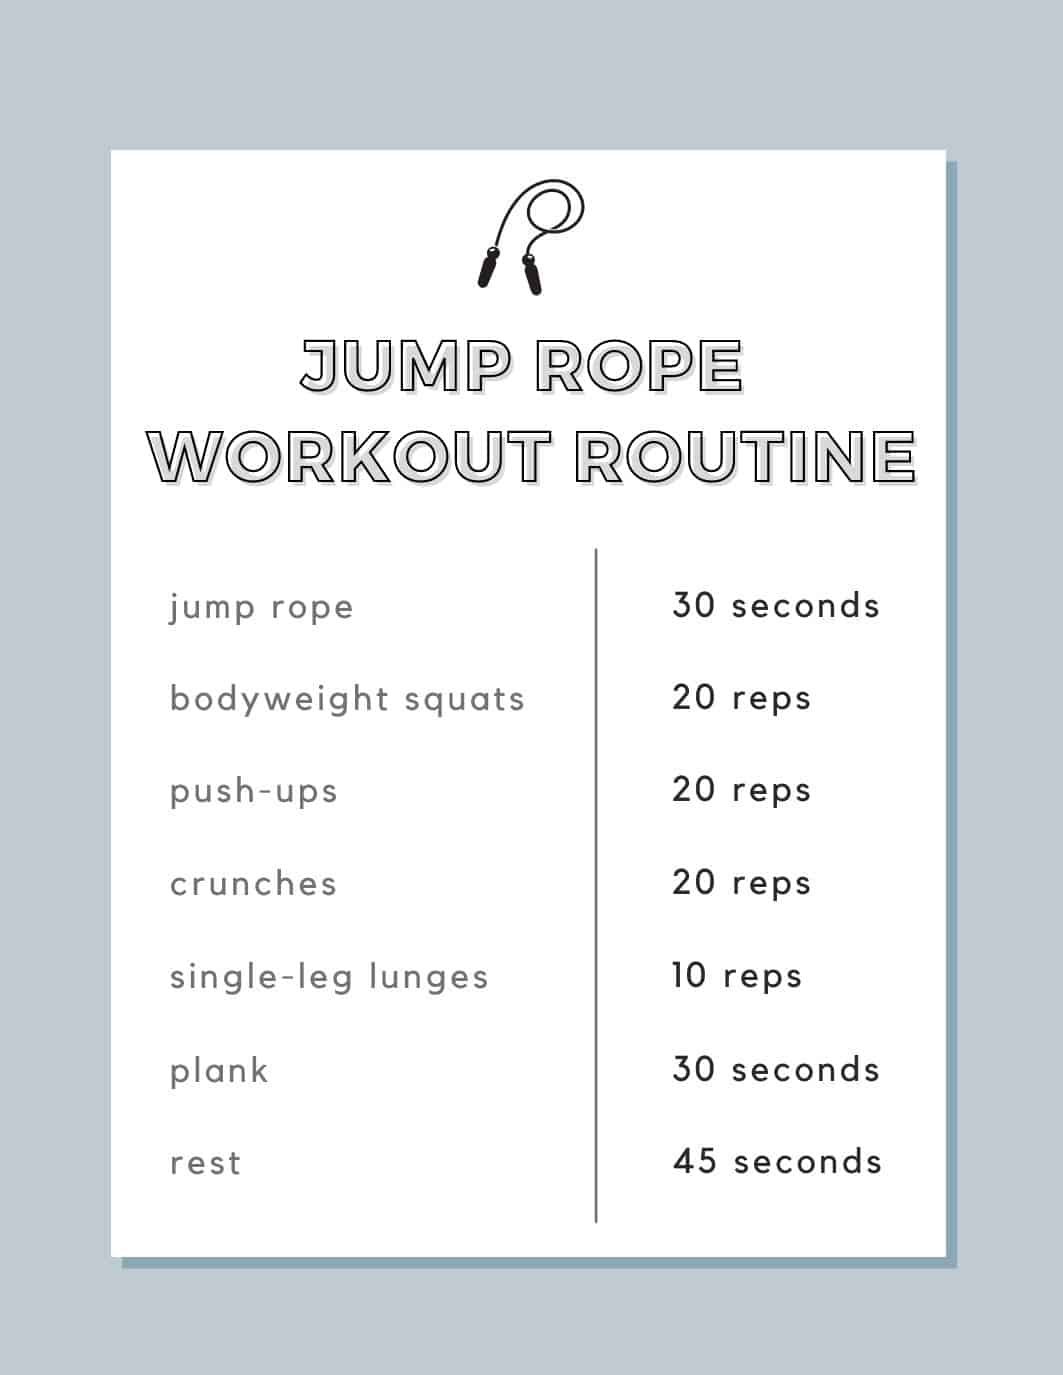 Jump rope workout routine.